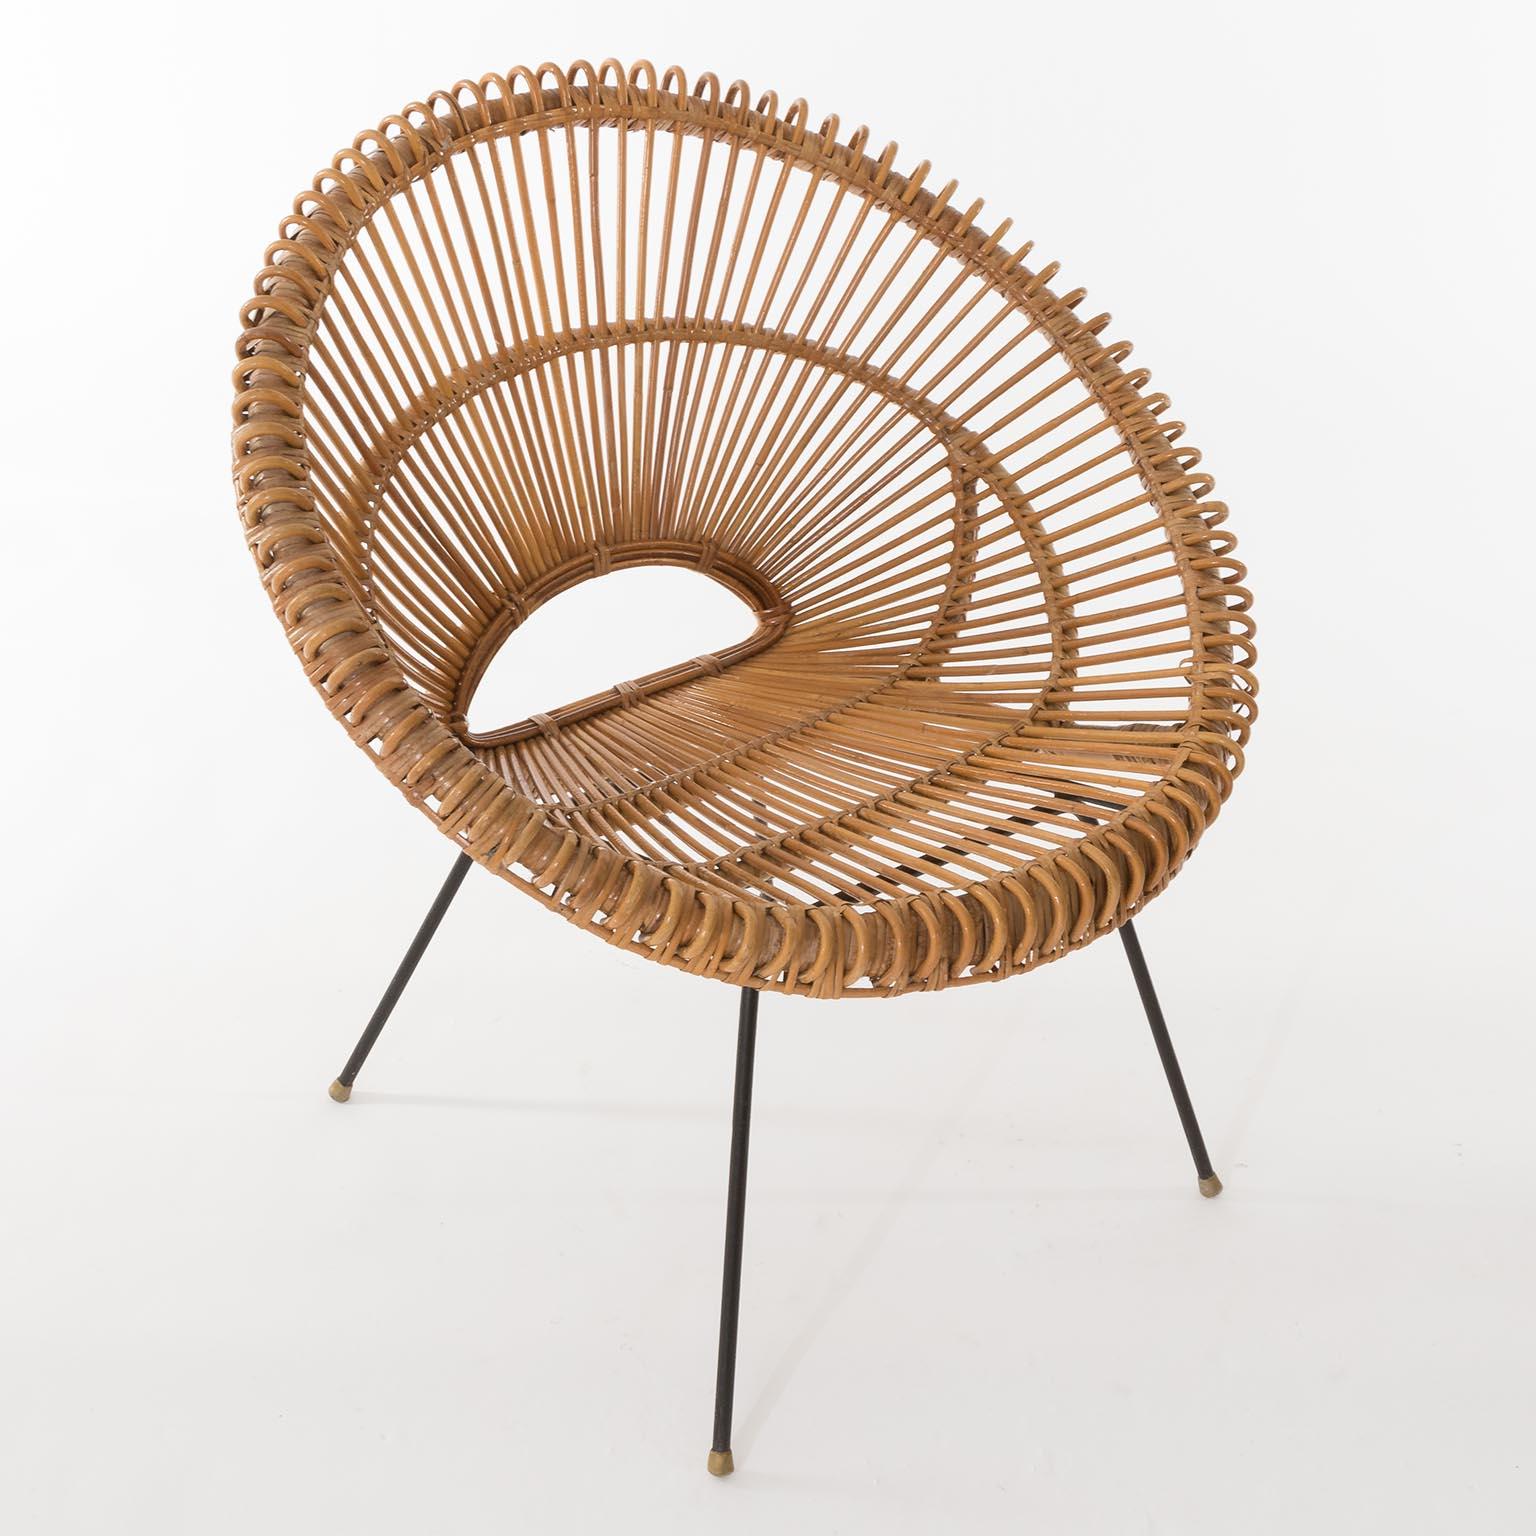 Metal Pair of Mid-Century Modern Rattan Bamboo Chairs, Janine Abraham, Dirk Rol, 1960s For Sale